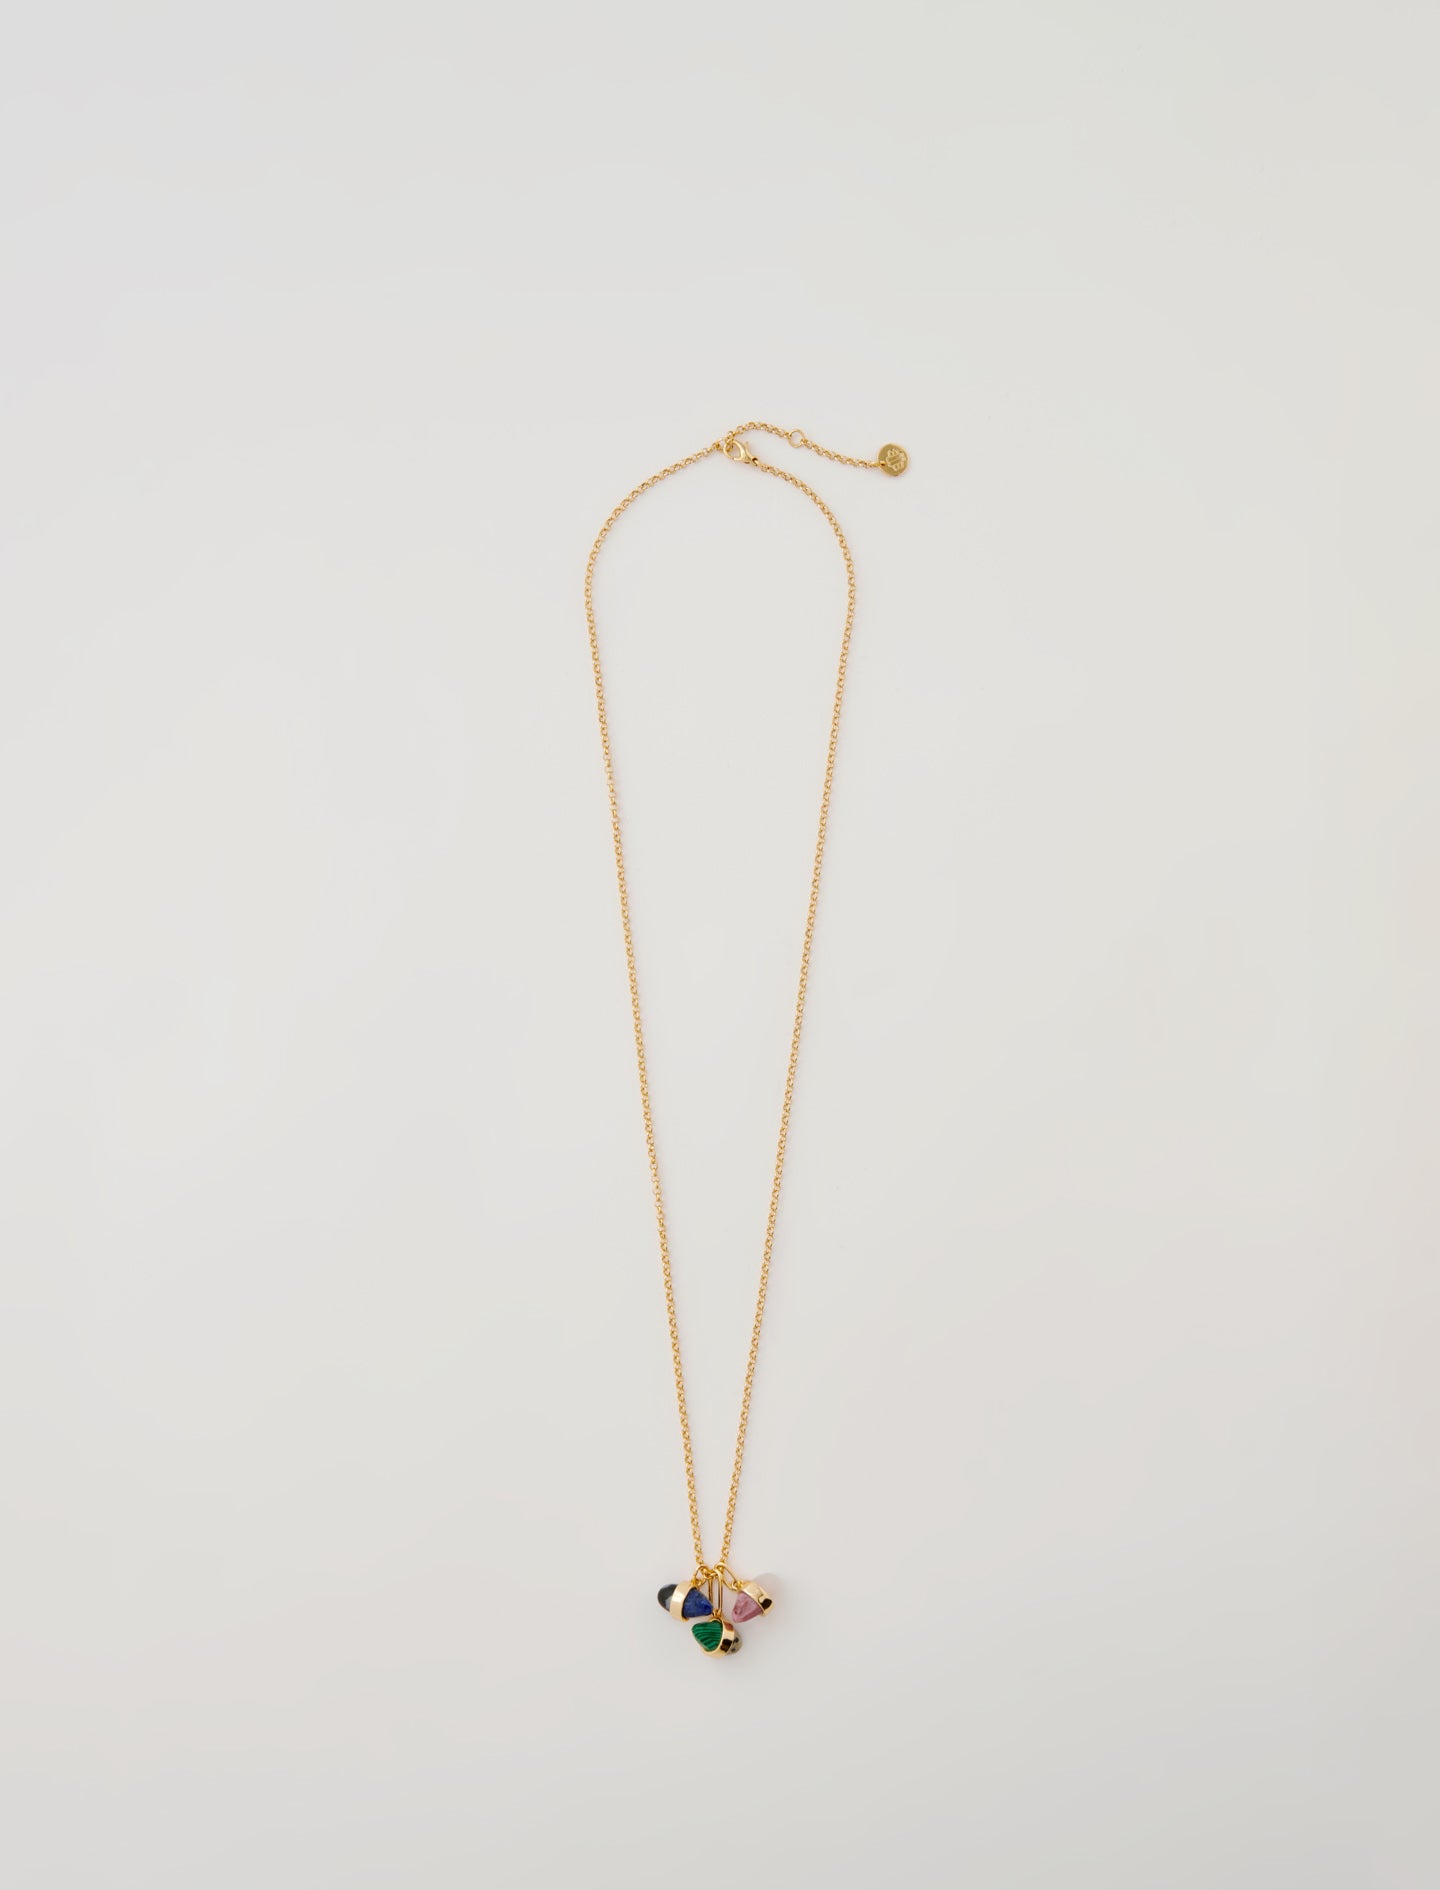 Gold featured Chain necklace